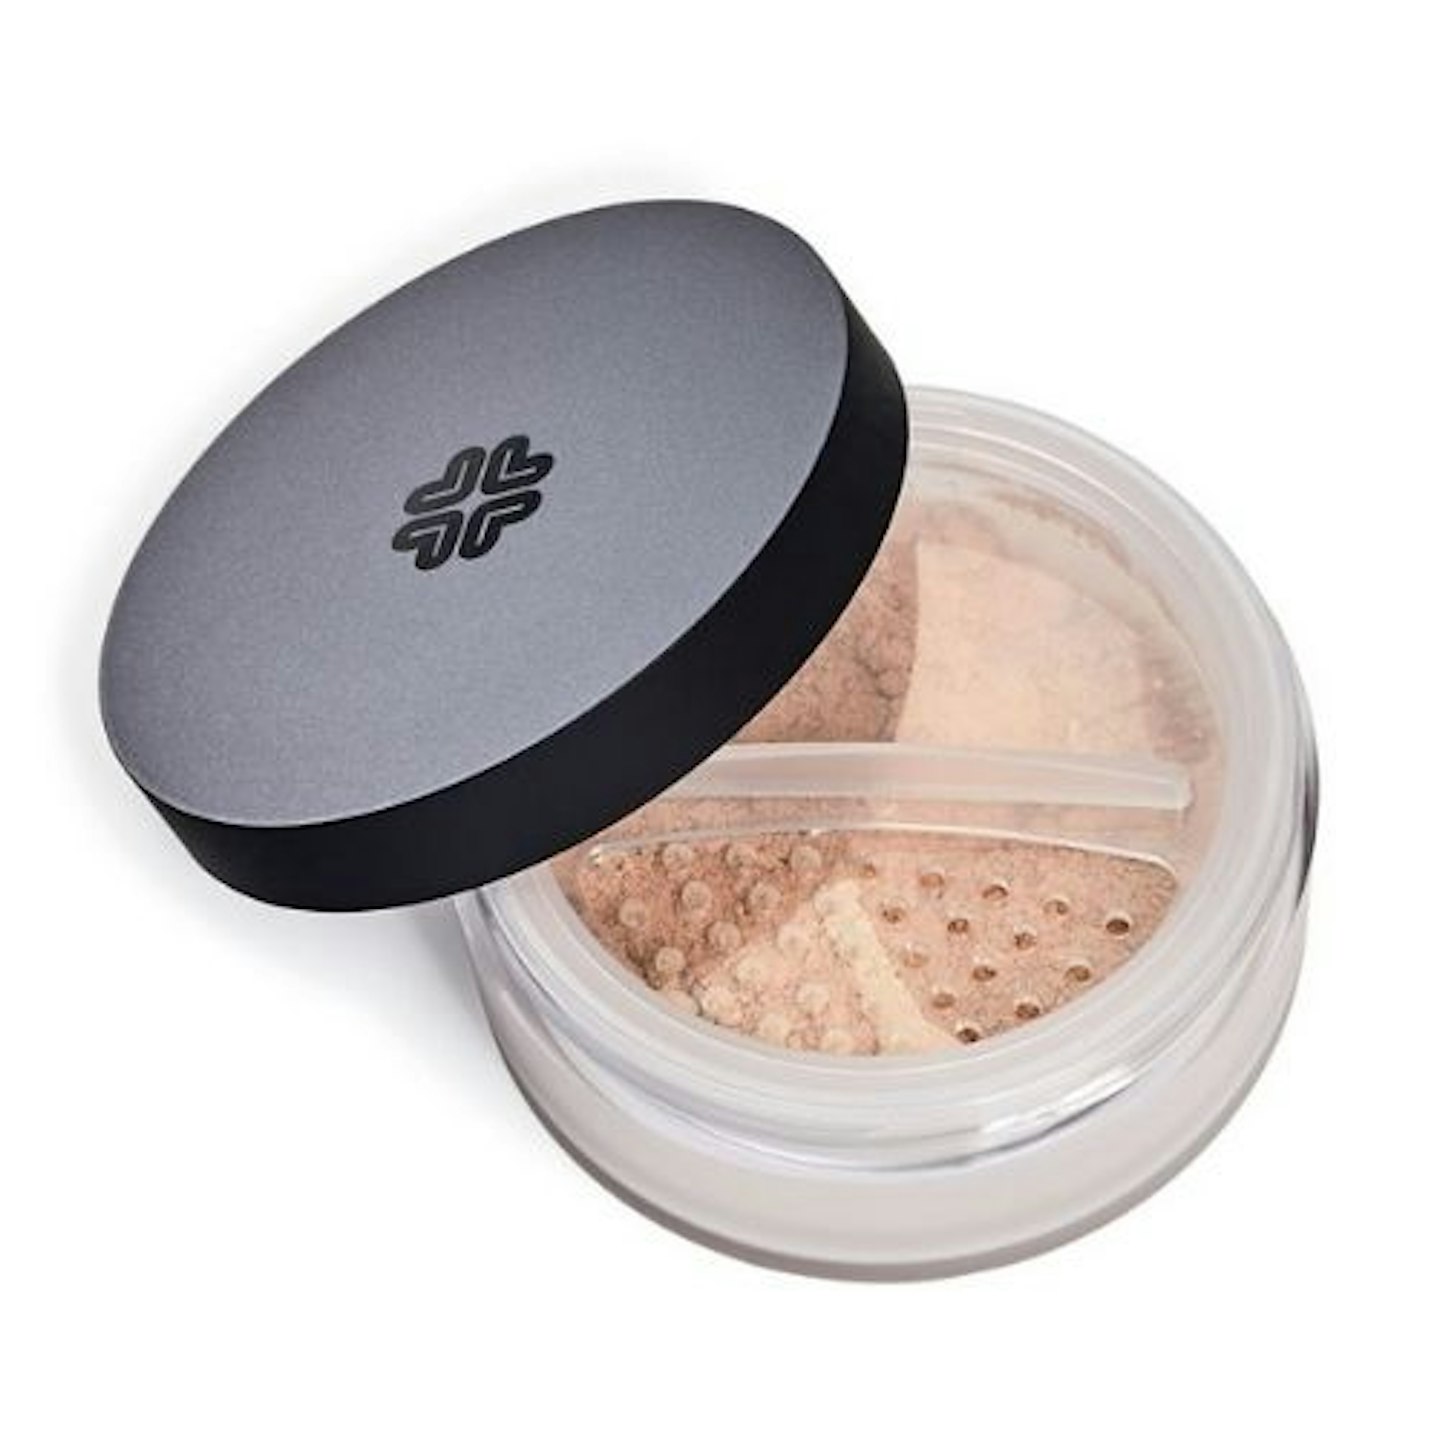 The Best Mineral Foundations For